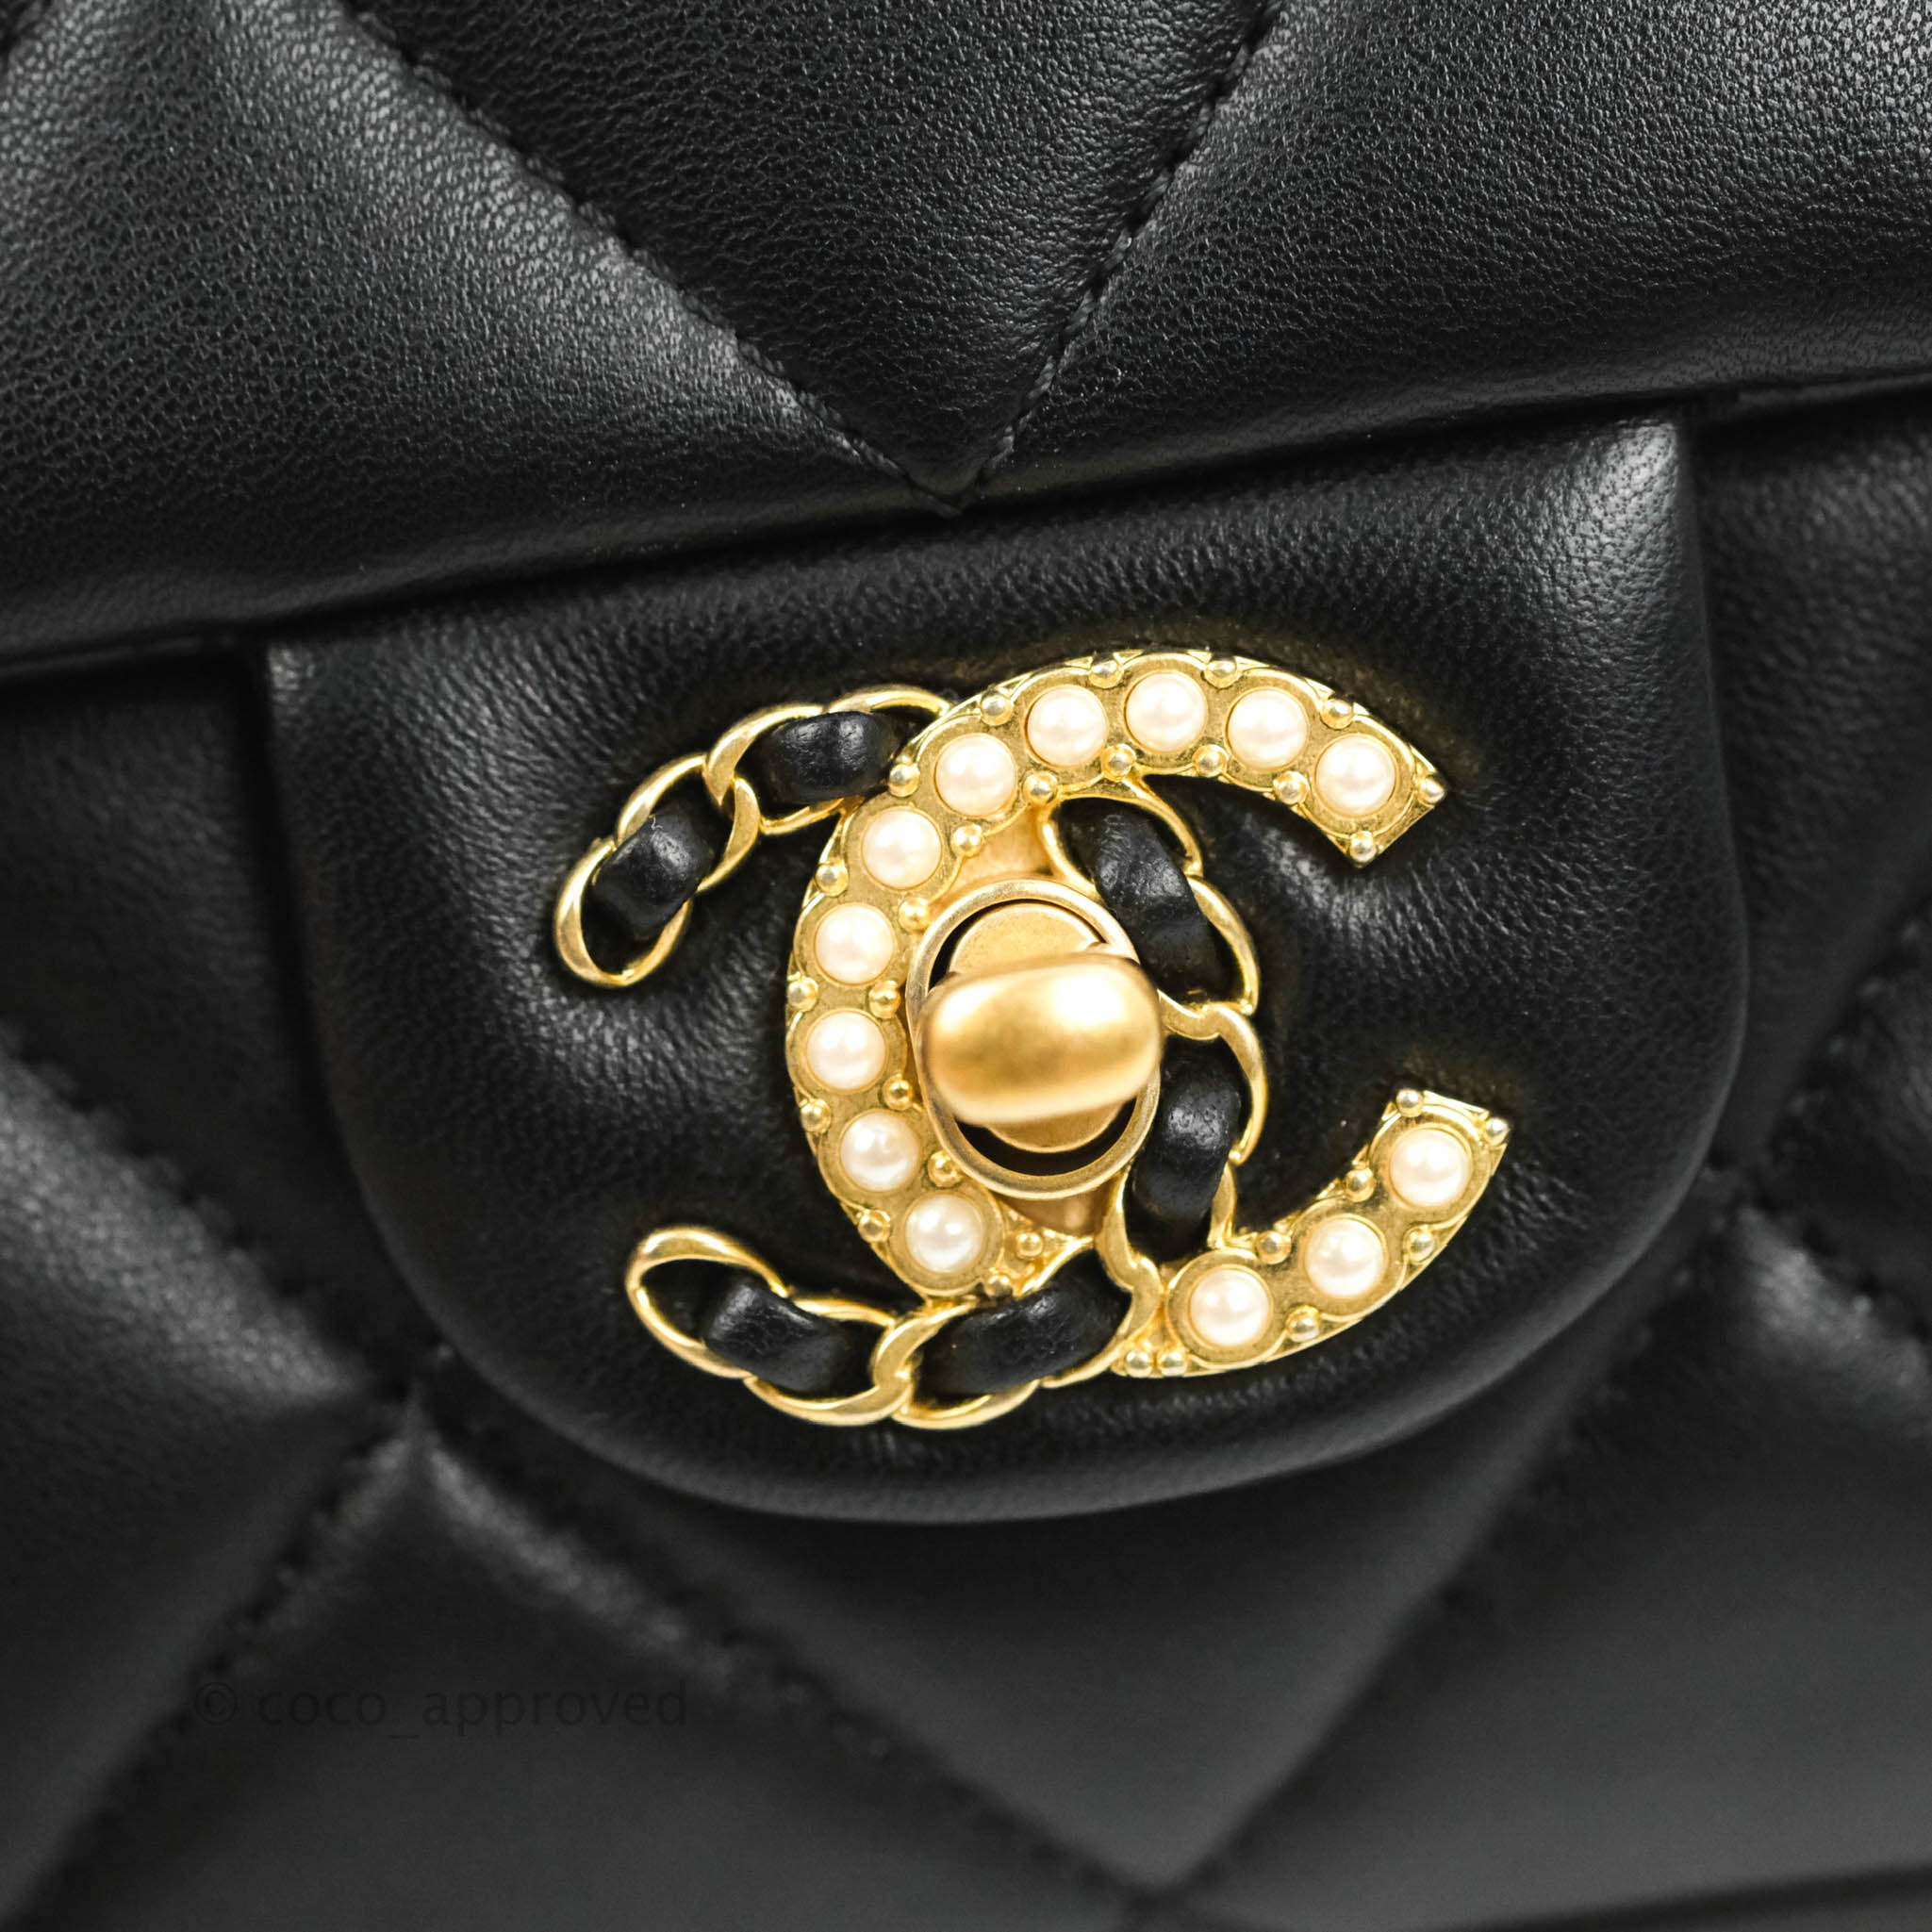 brown chanel classic flap bag